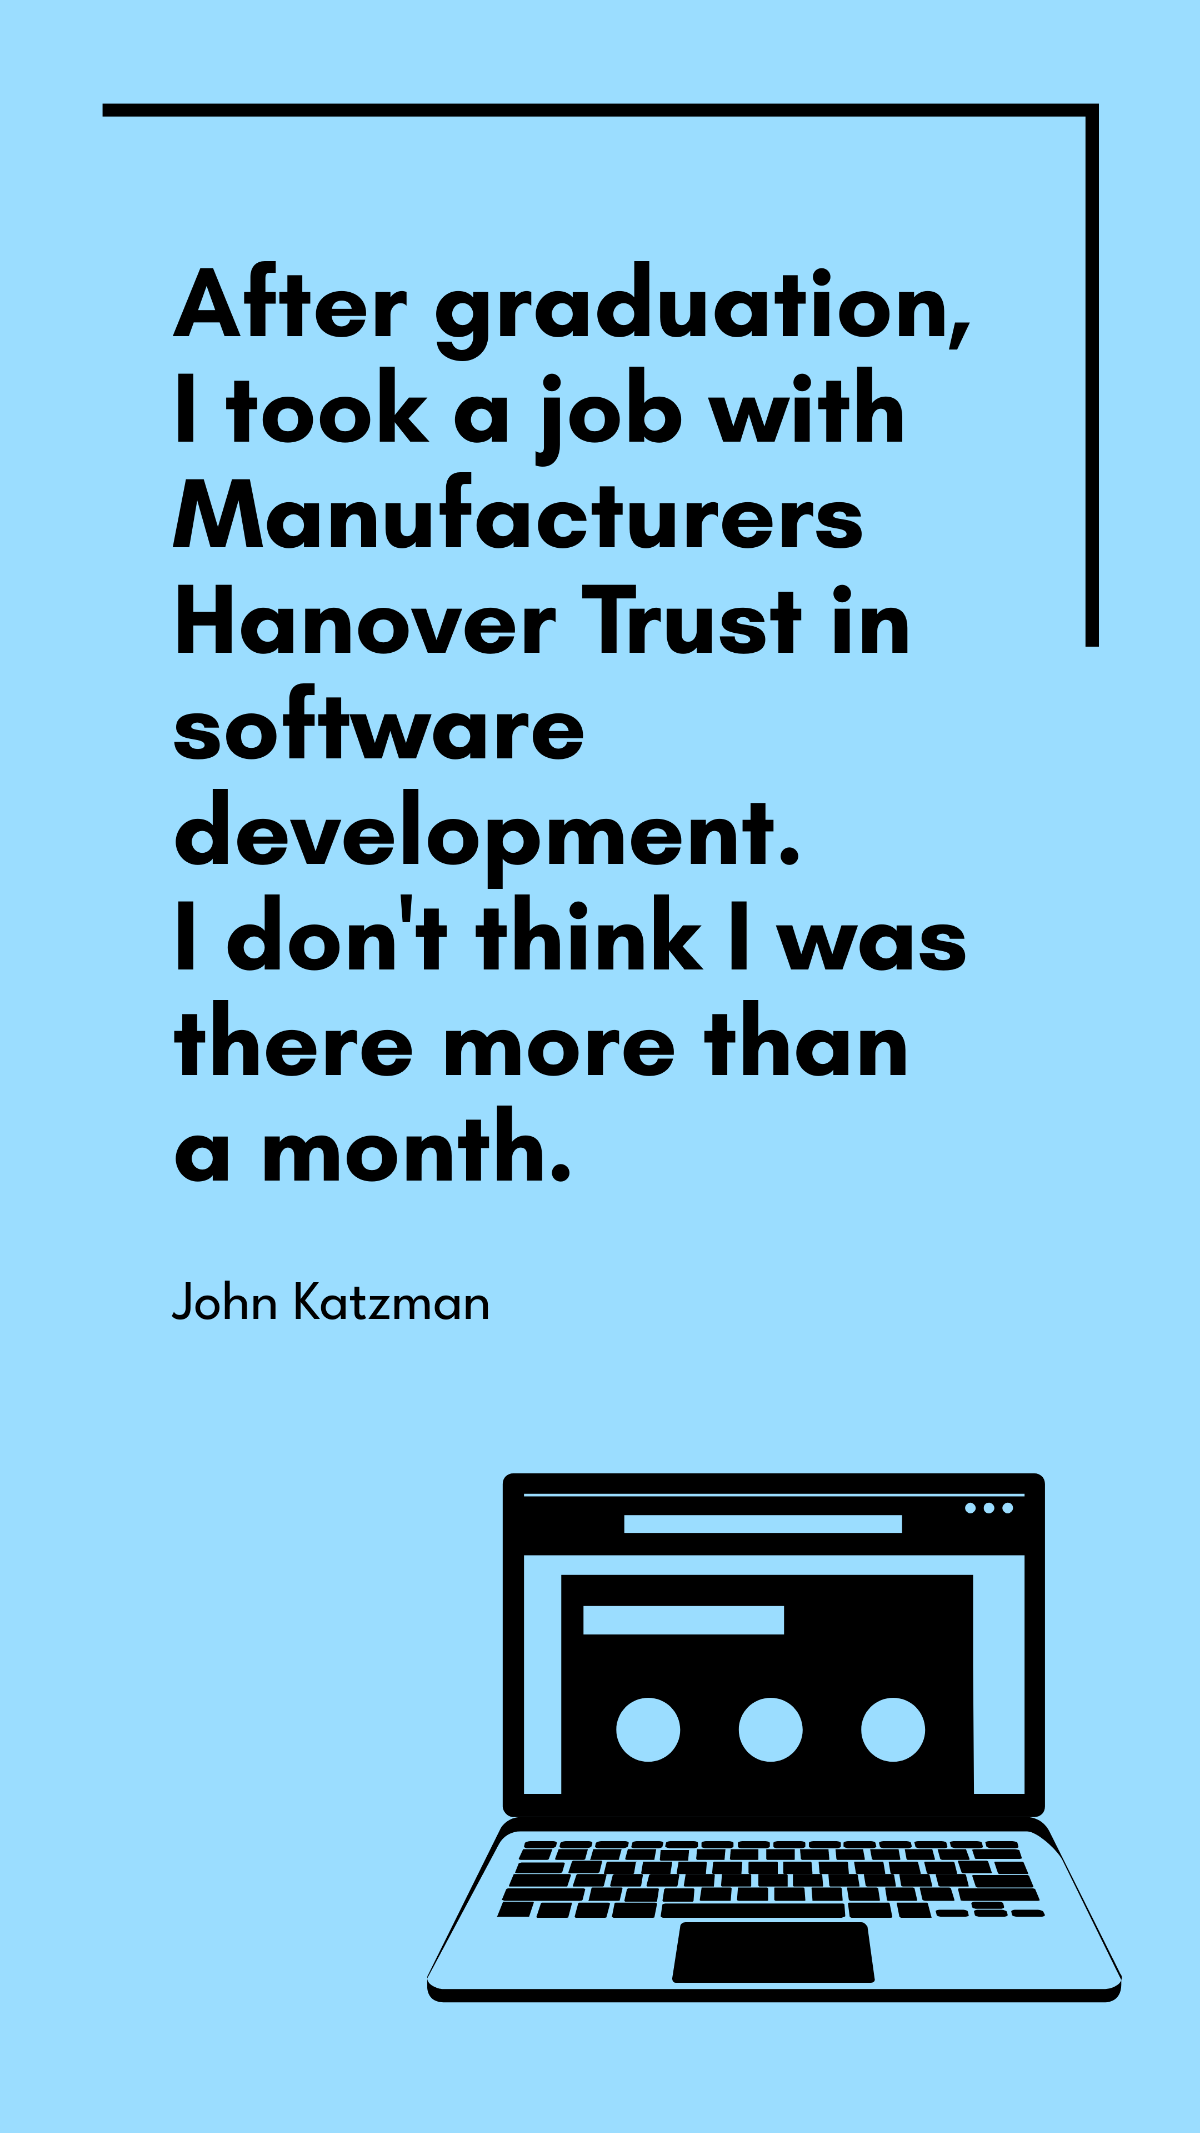 John Katzman - After graduation, I took a job with Manufacturers Hanover Trust in software development. I don't think I was there more than a month.